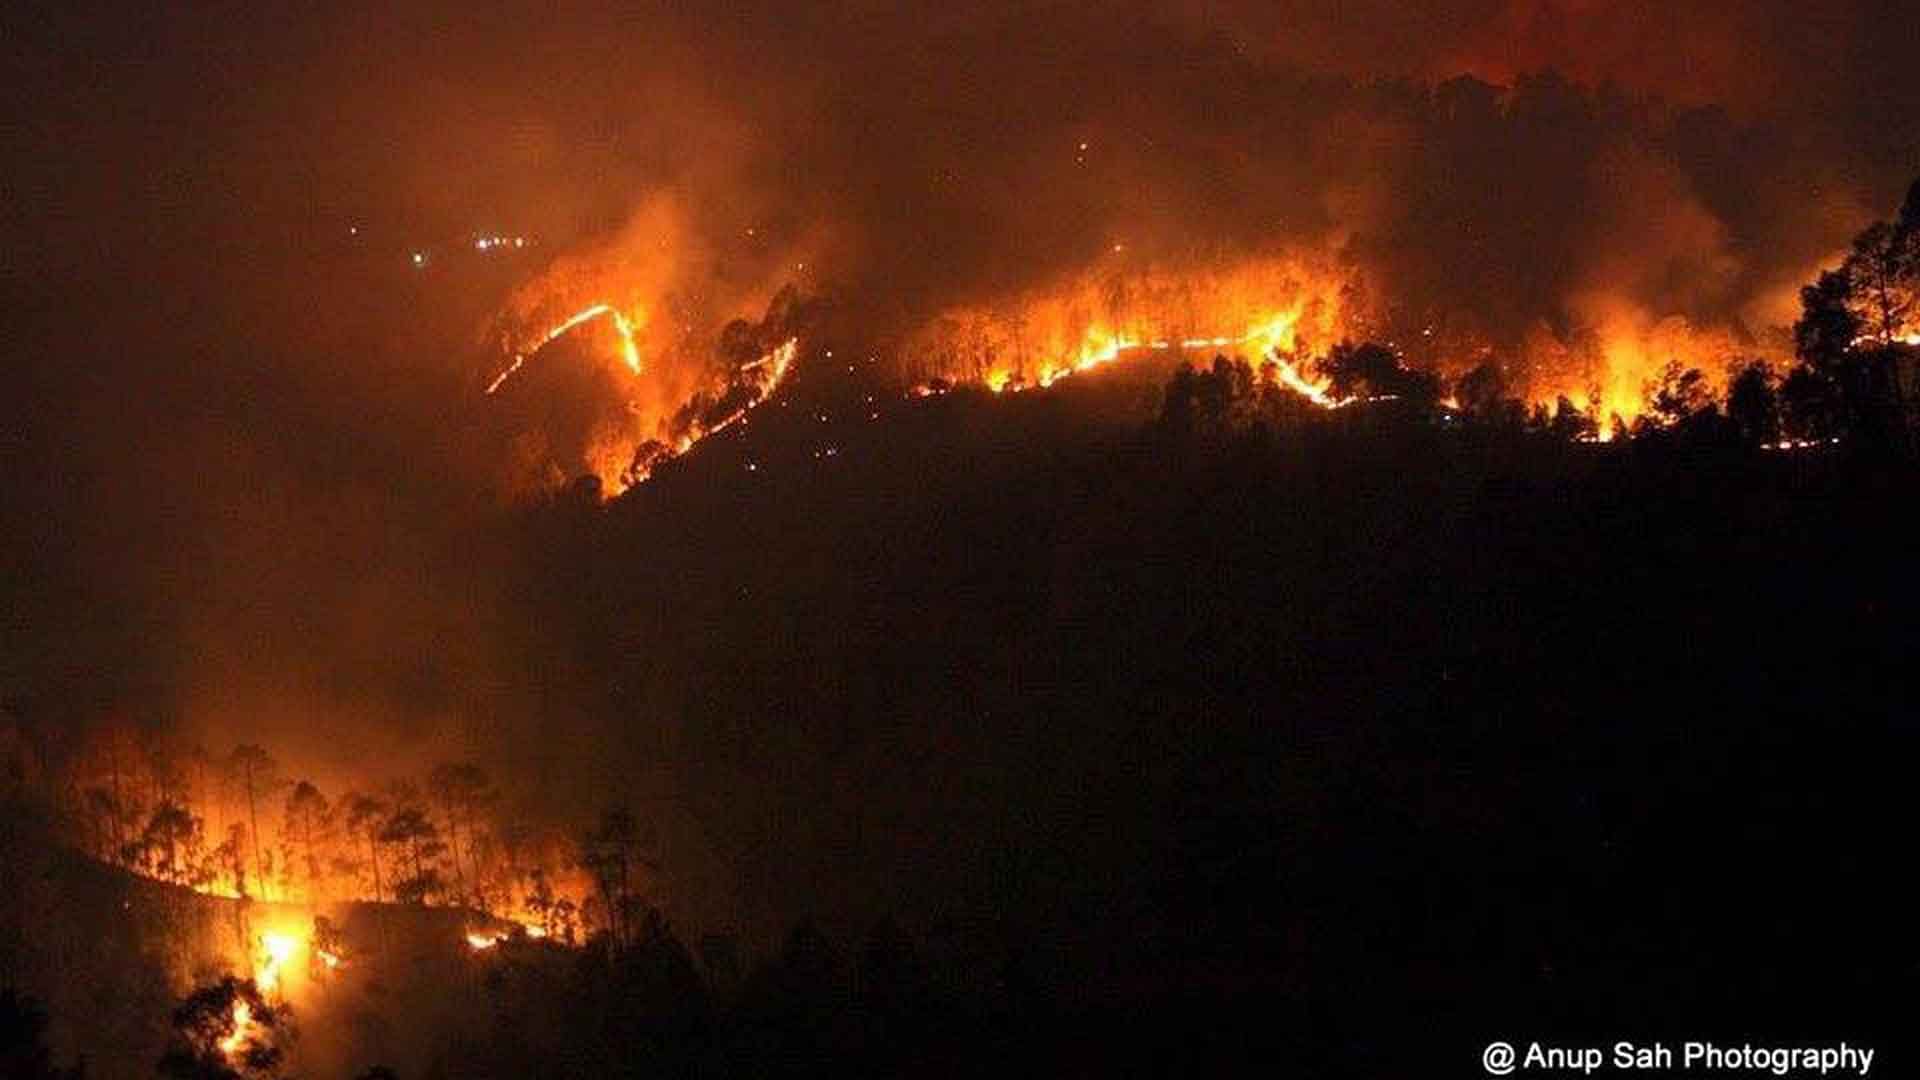 The Governor said all instructions given till now about forest fires must be followed strictly. (Photo: <a href="https://www.facebook.com/yla.smetacek/posts/10207779010246919?pnref=story">Facebook.com/ElaSmetack</a>)